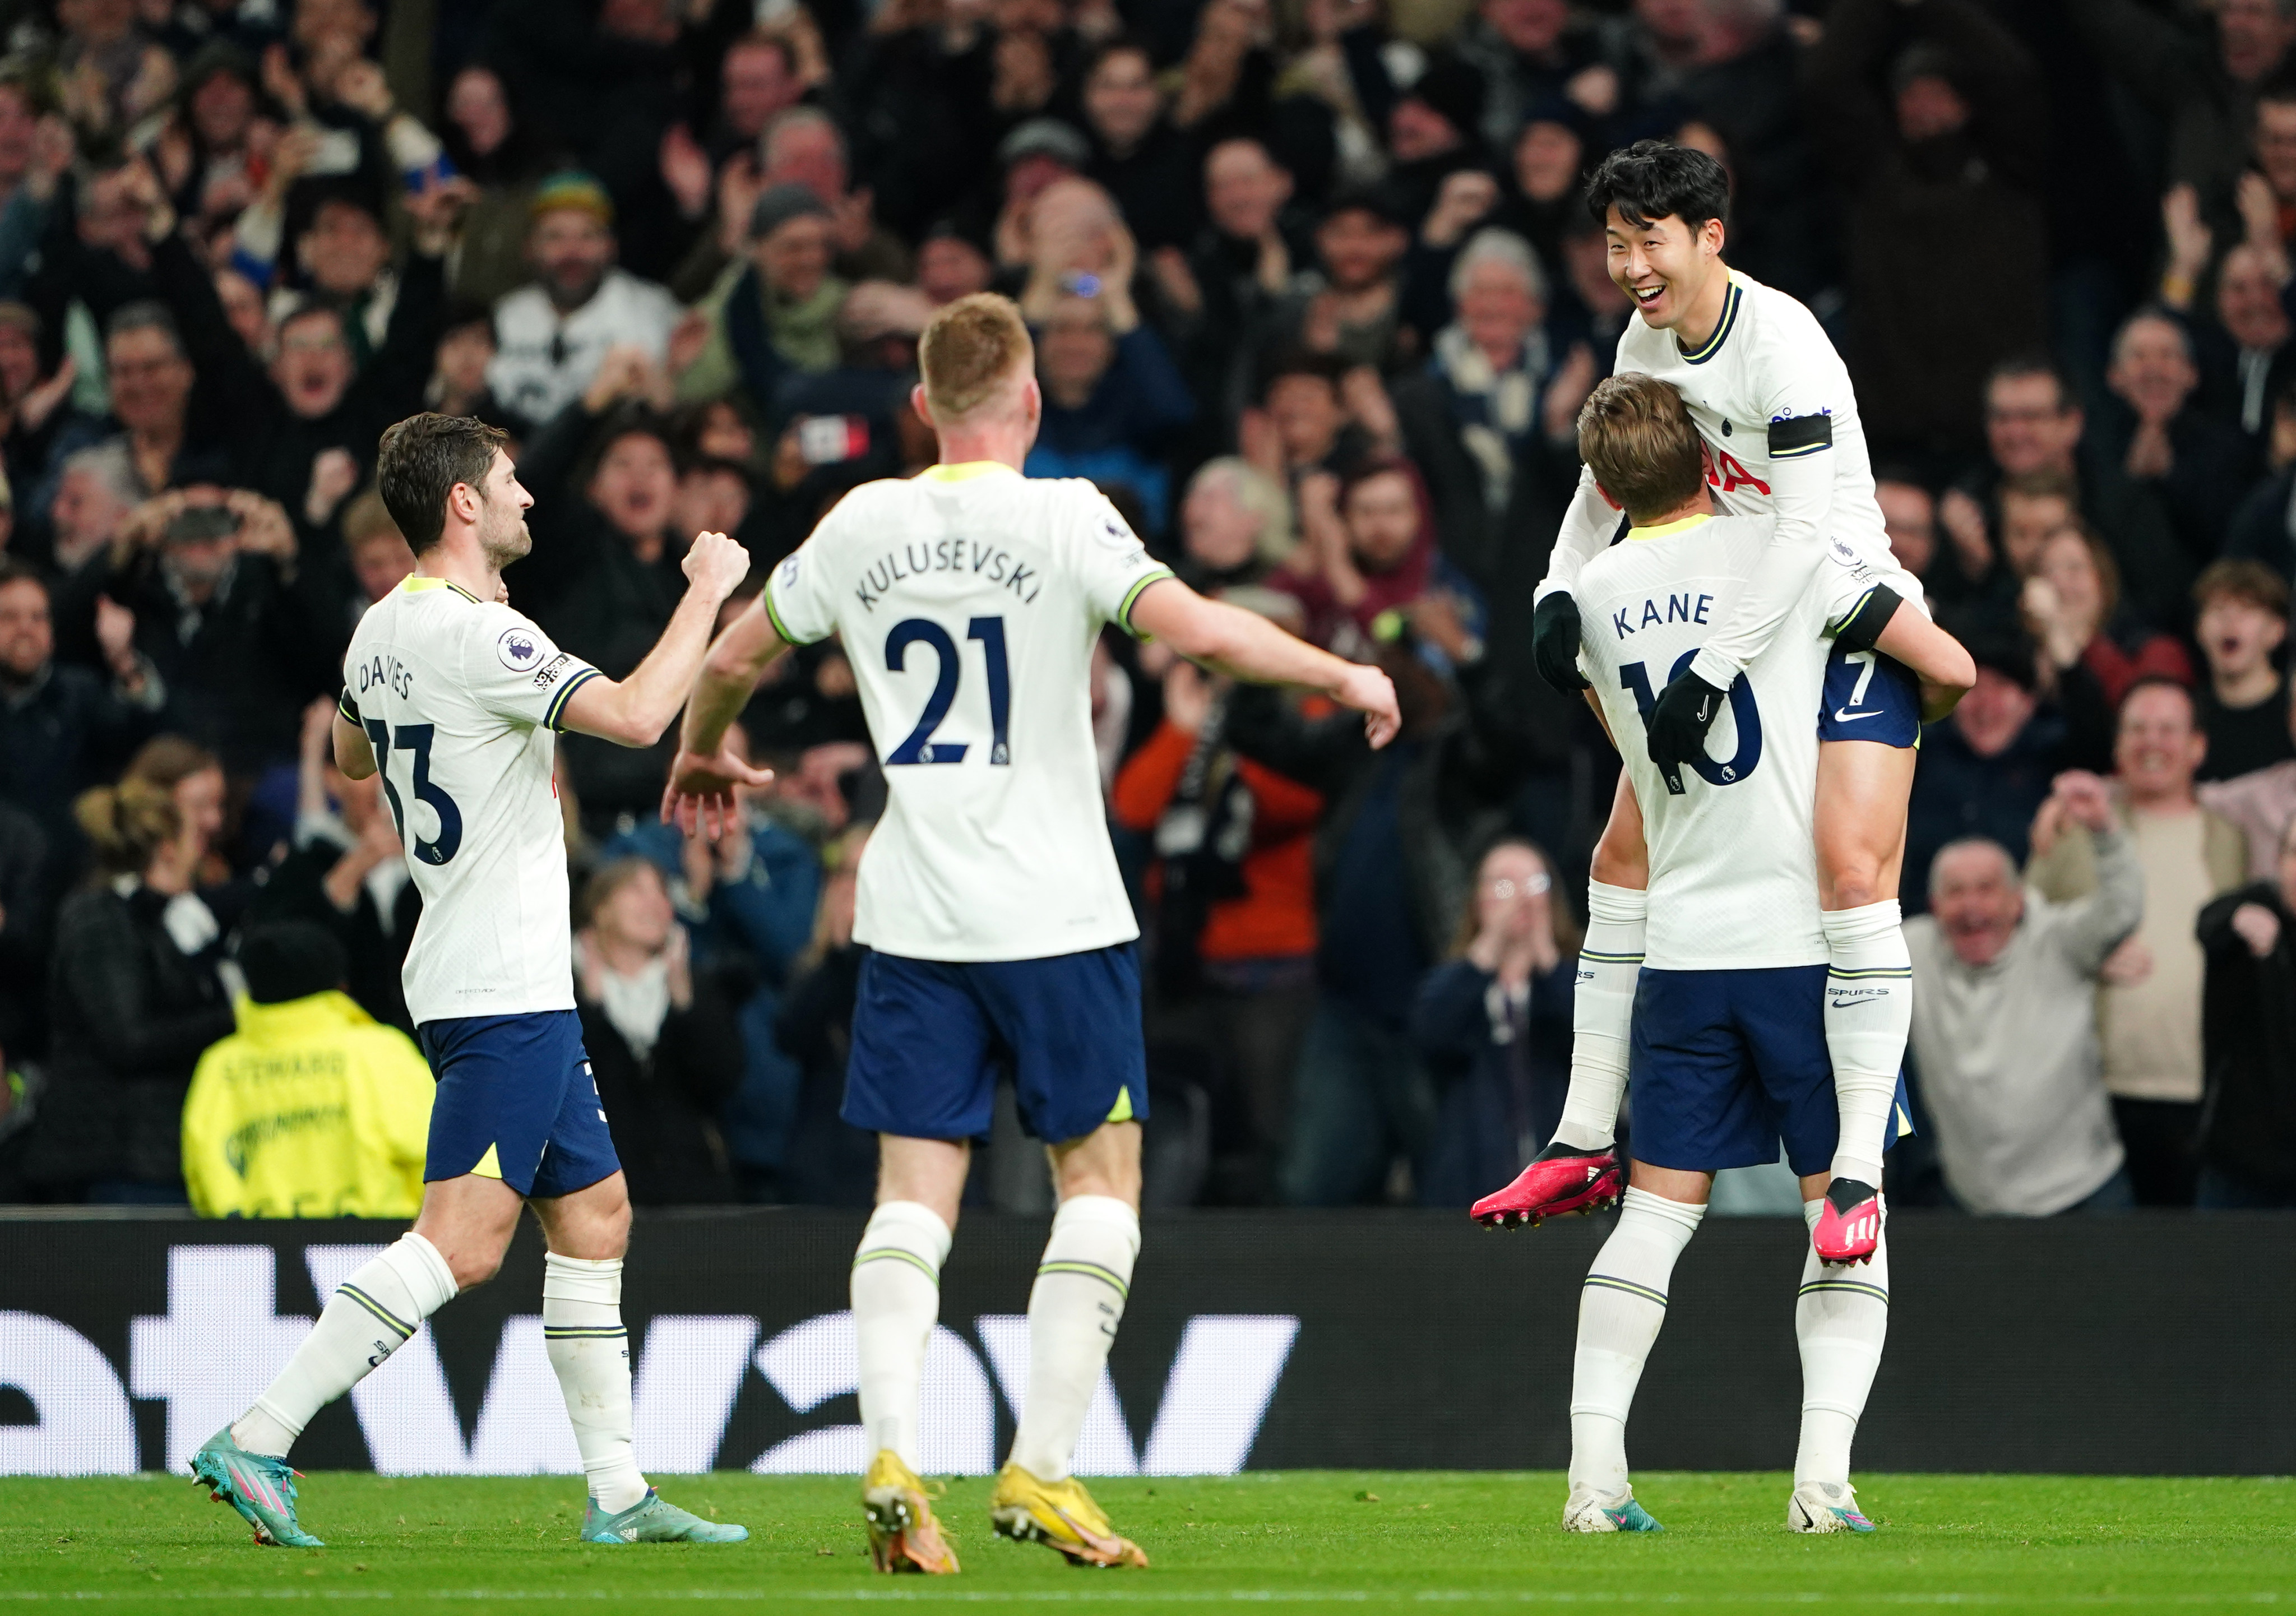 Tottenham Hotspur’s Son Heung-min celebrates scoring his side’s second goal against West Ham United with teammate Harry Kane. Photo: DPA